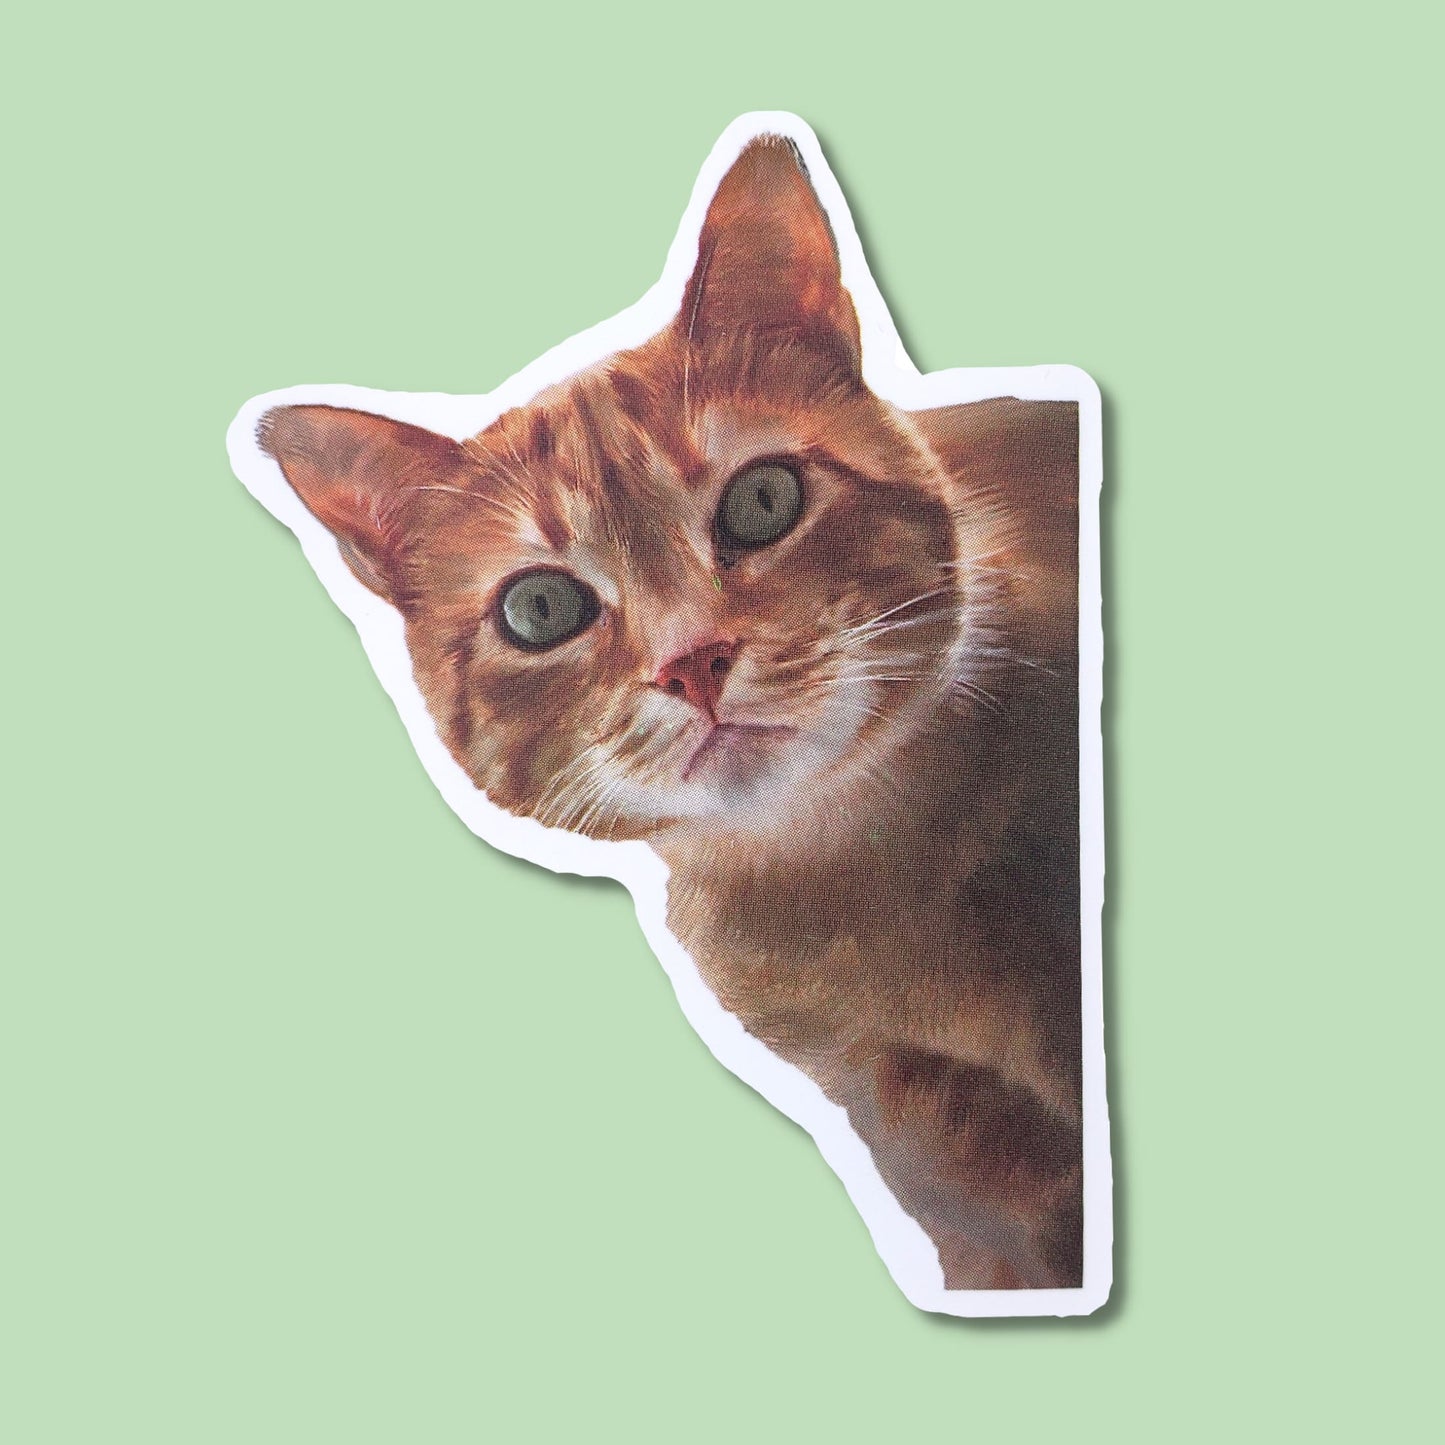 Forget Something Grumpy Tabby Waterproof Sticker from Confetti Kitty, Only 1.00